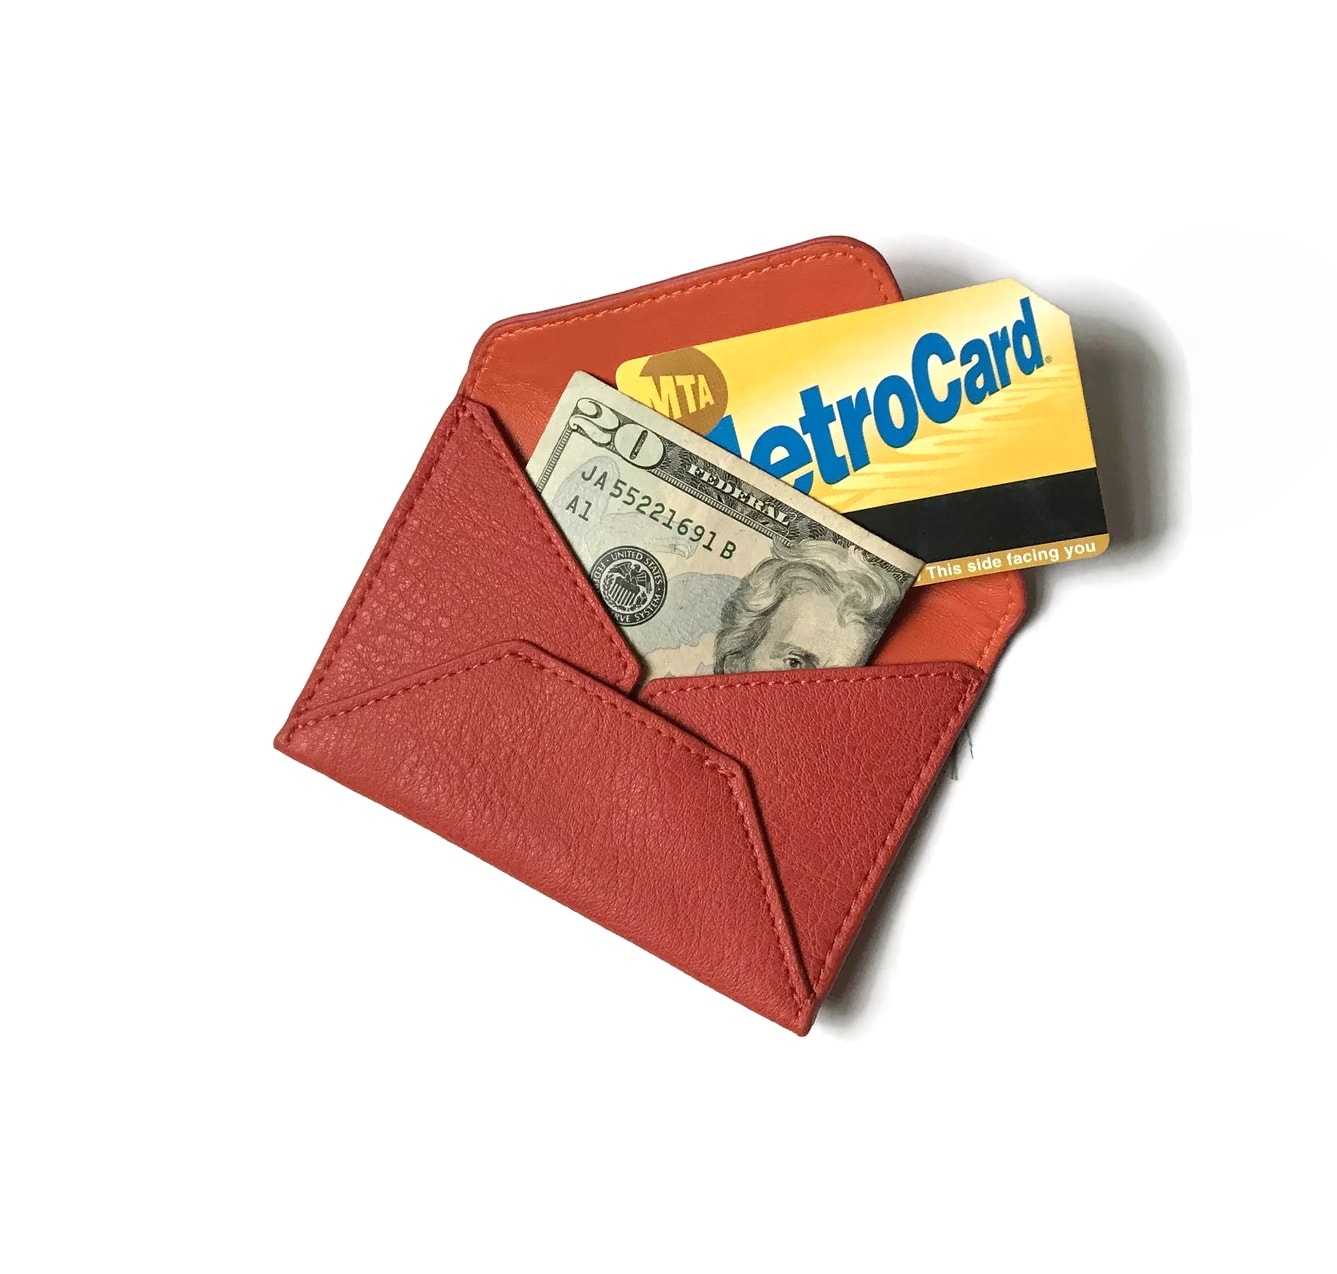 Chic & eco-friendly card case! Smith holds business cards, credit cards, MetroCards. Vegan leather, 5 colors, orange lining, embossed logo. Perfect gift! Shop now!